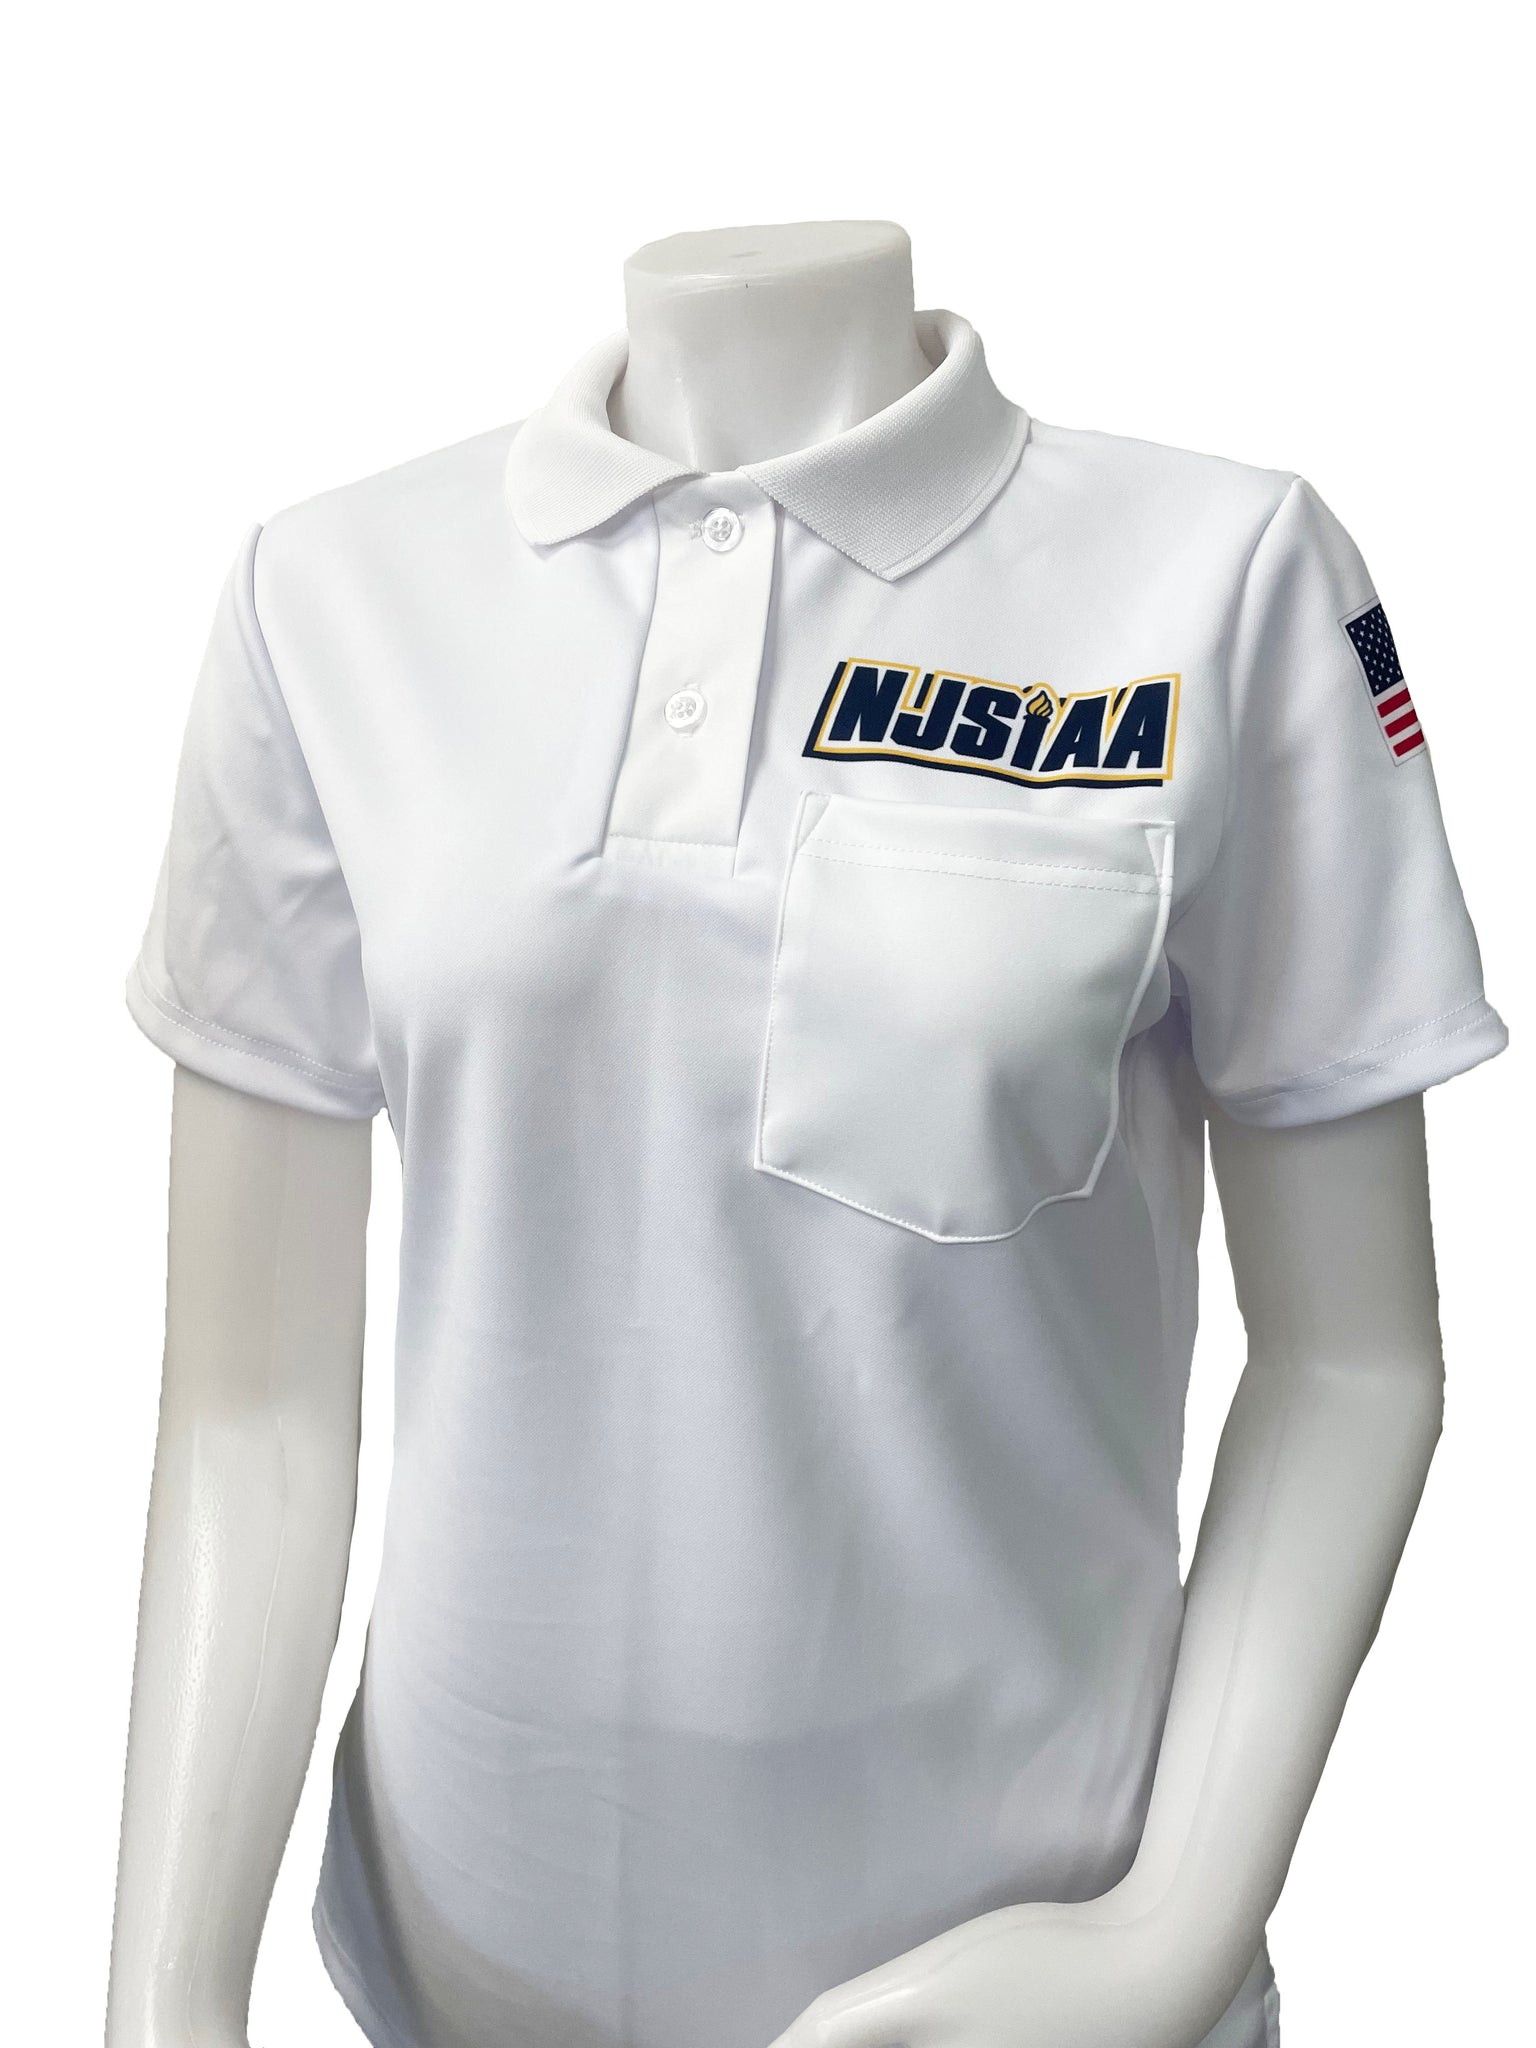 USA412NJ - Smitty "Made in USA" - NJSIAA Women's Volleyball/Swimming Short Sleeve Shirt with Pocket